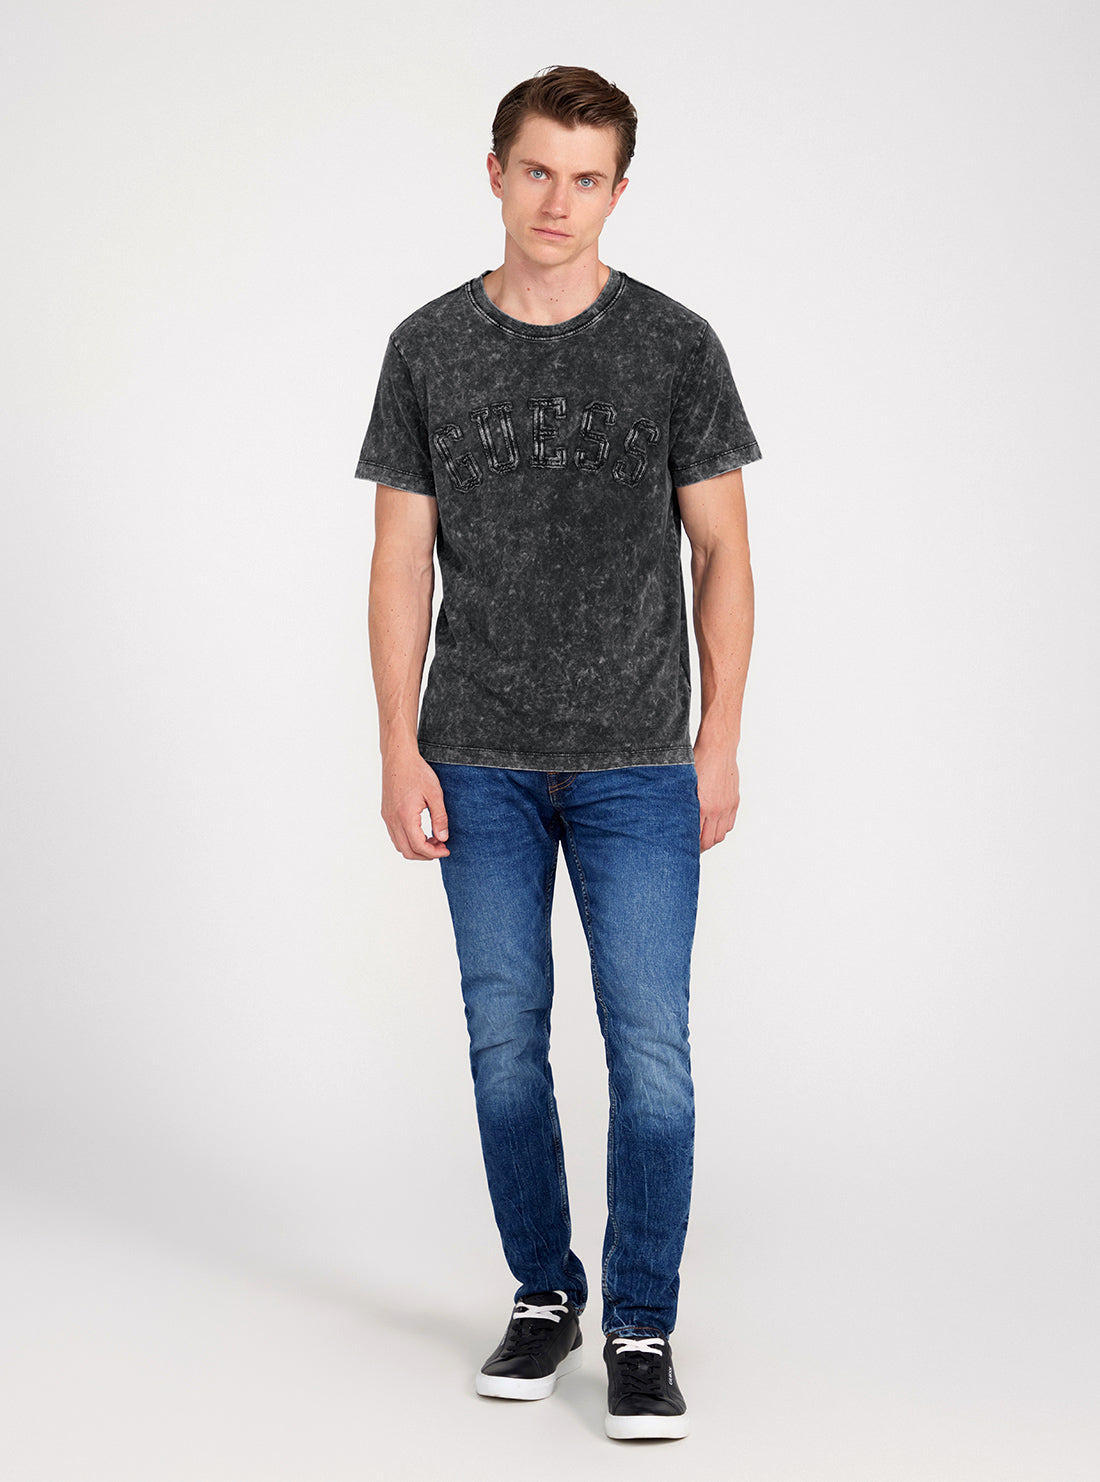 GUESS Black Wash Short Sleeve Patch T-Shirt full view